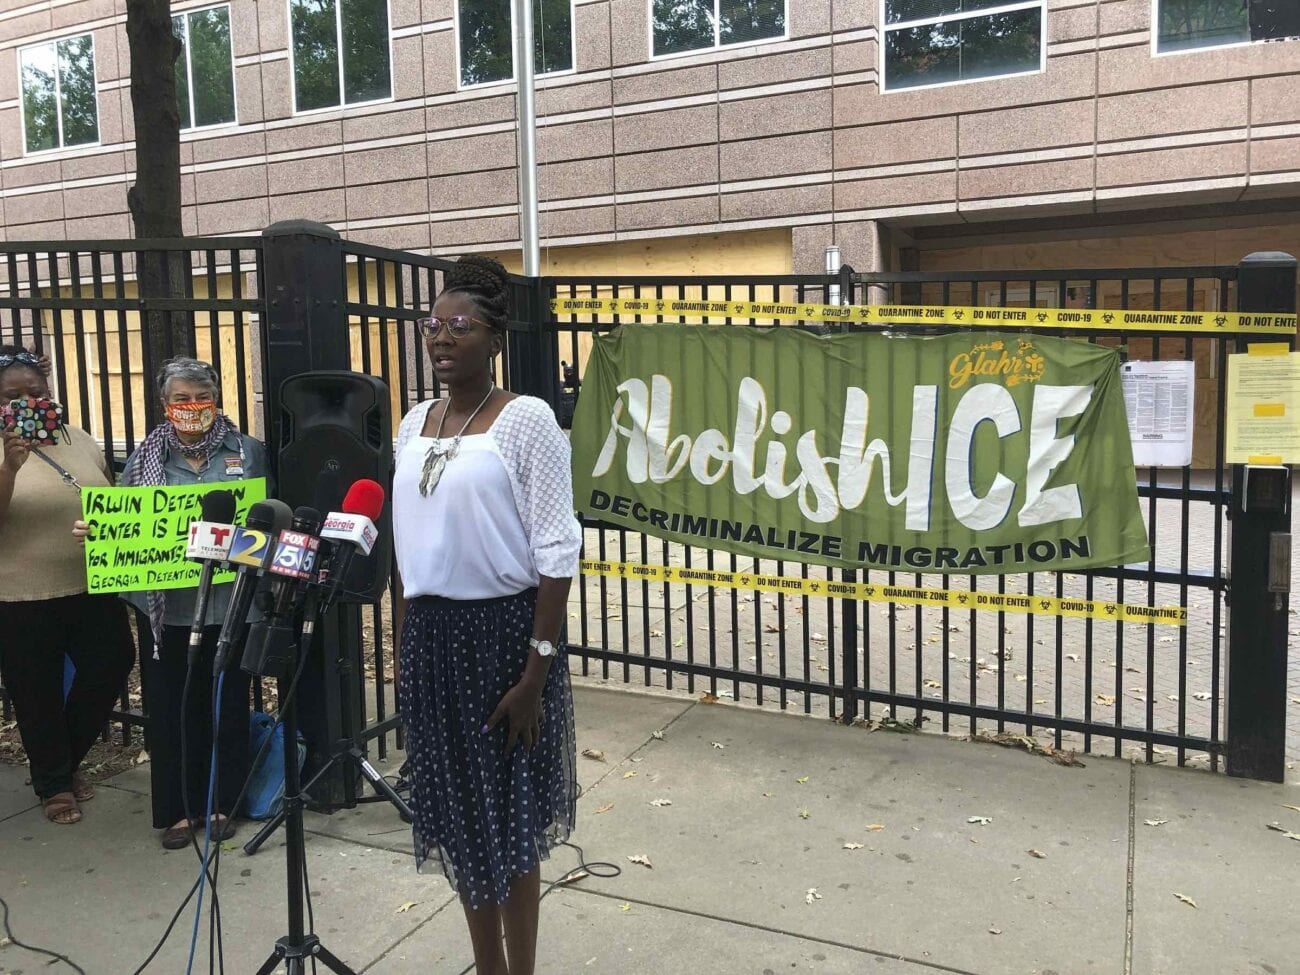 Here are just a few of the stories these women have shared and what horror they faced while in ICE Detention Centers.